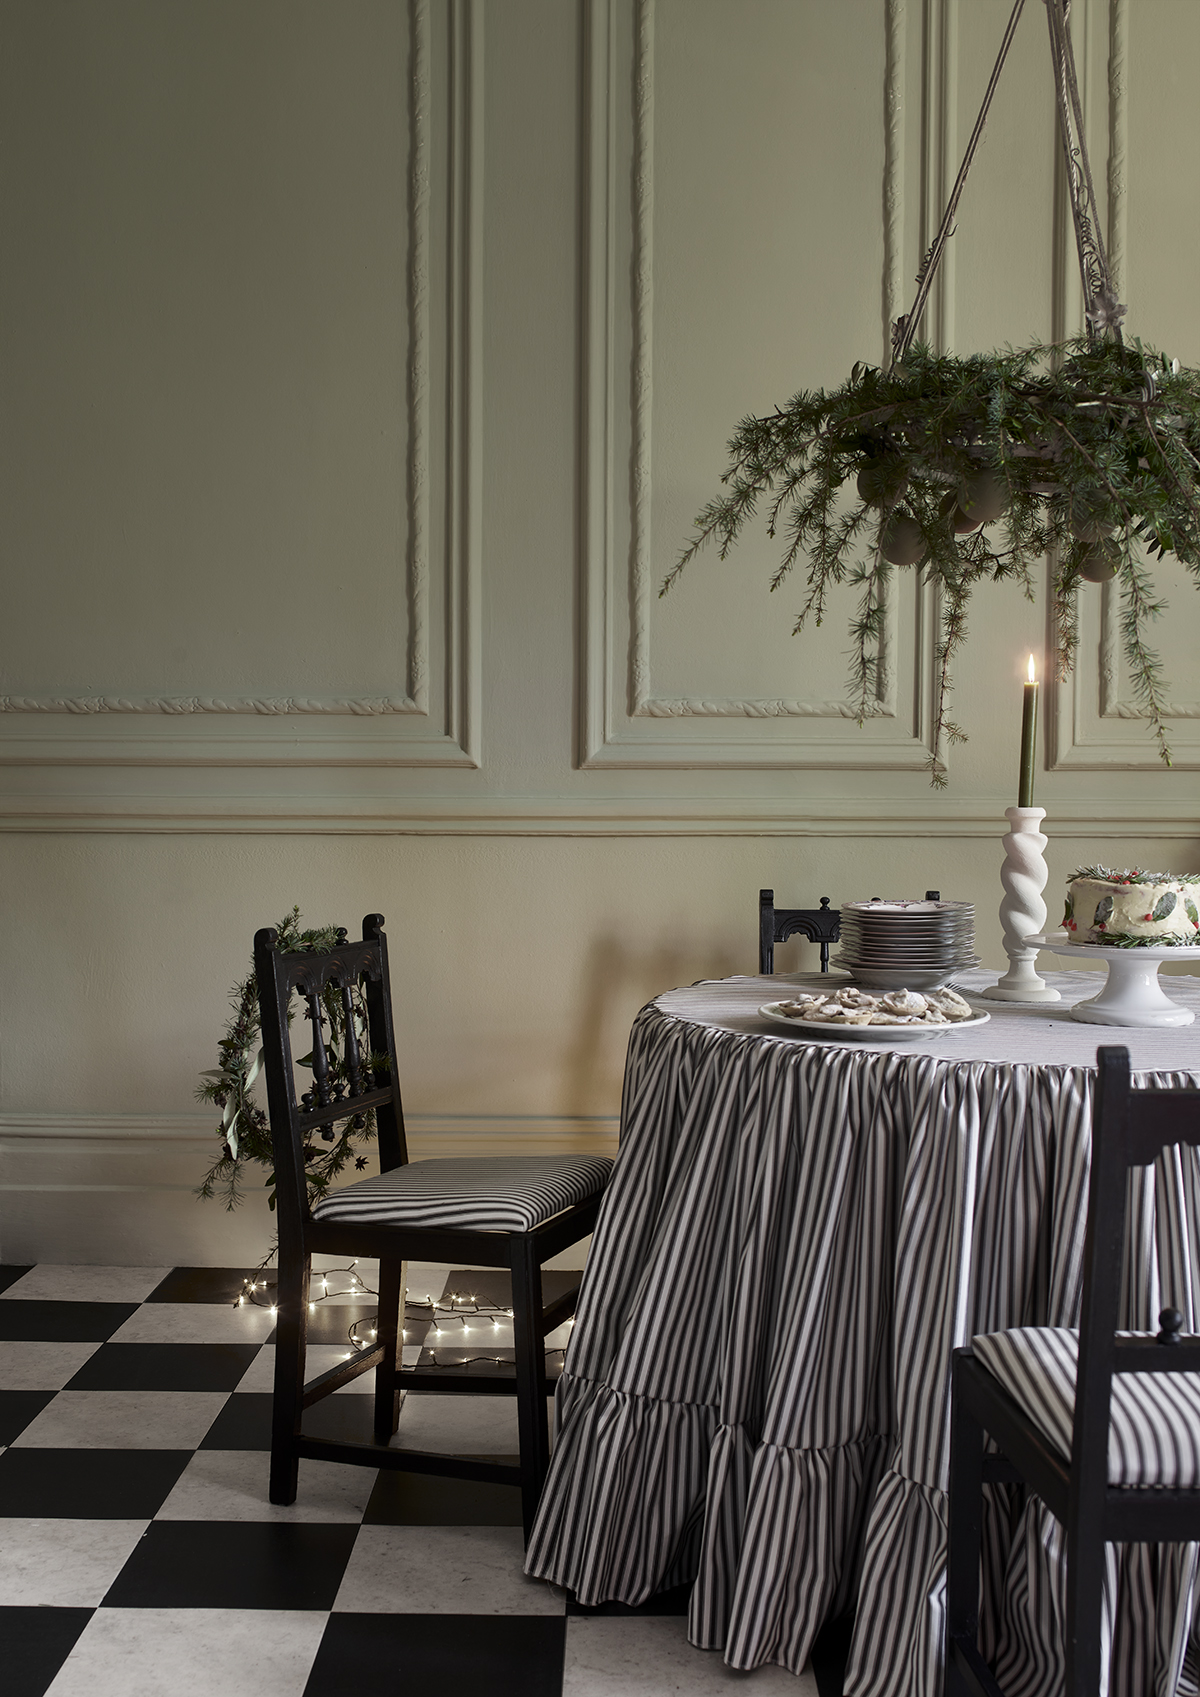 Annie Sloan Wall Paint used in Christmas dining set up